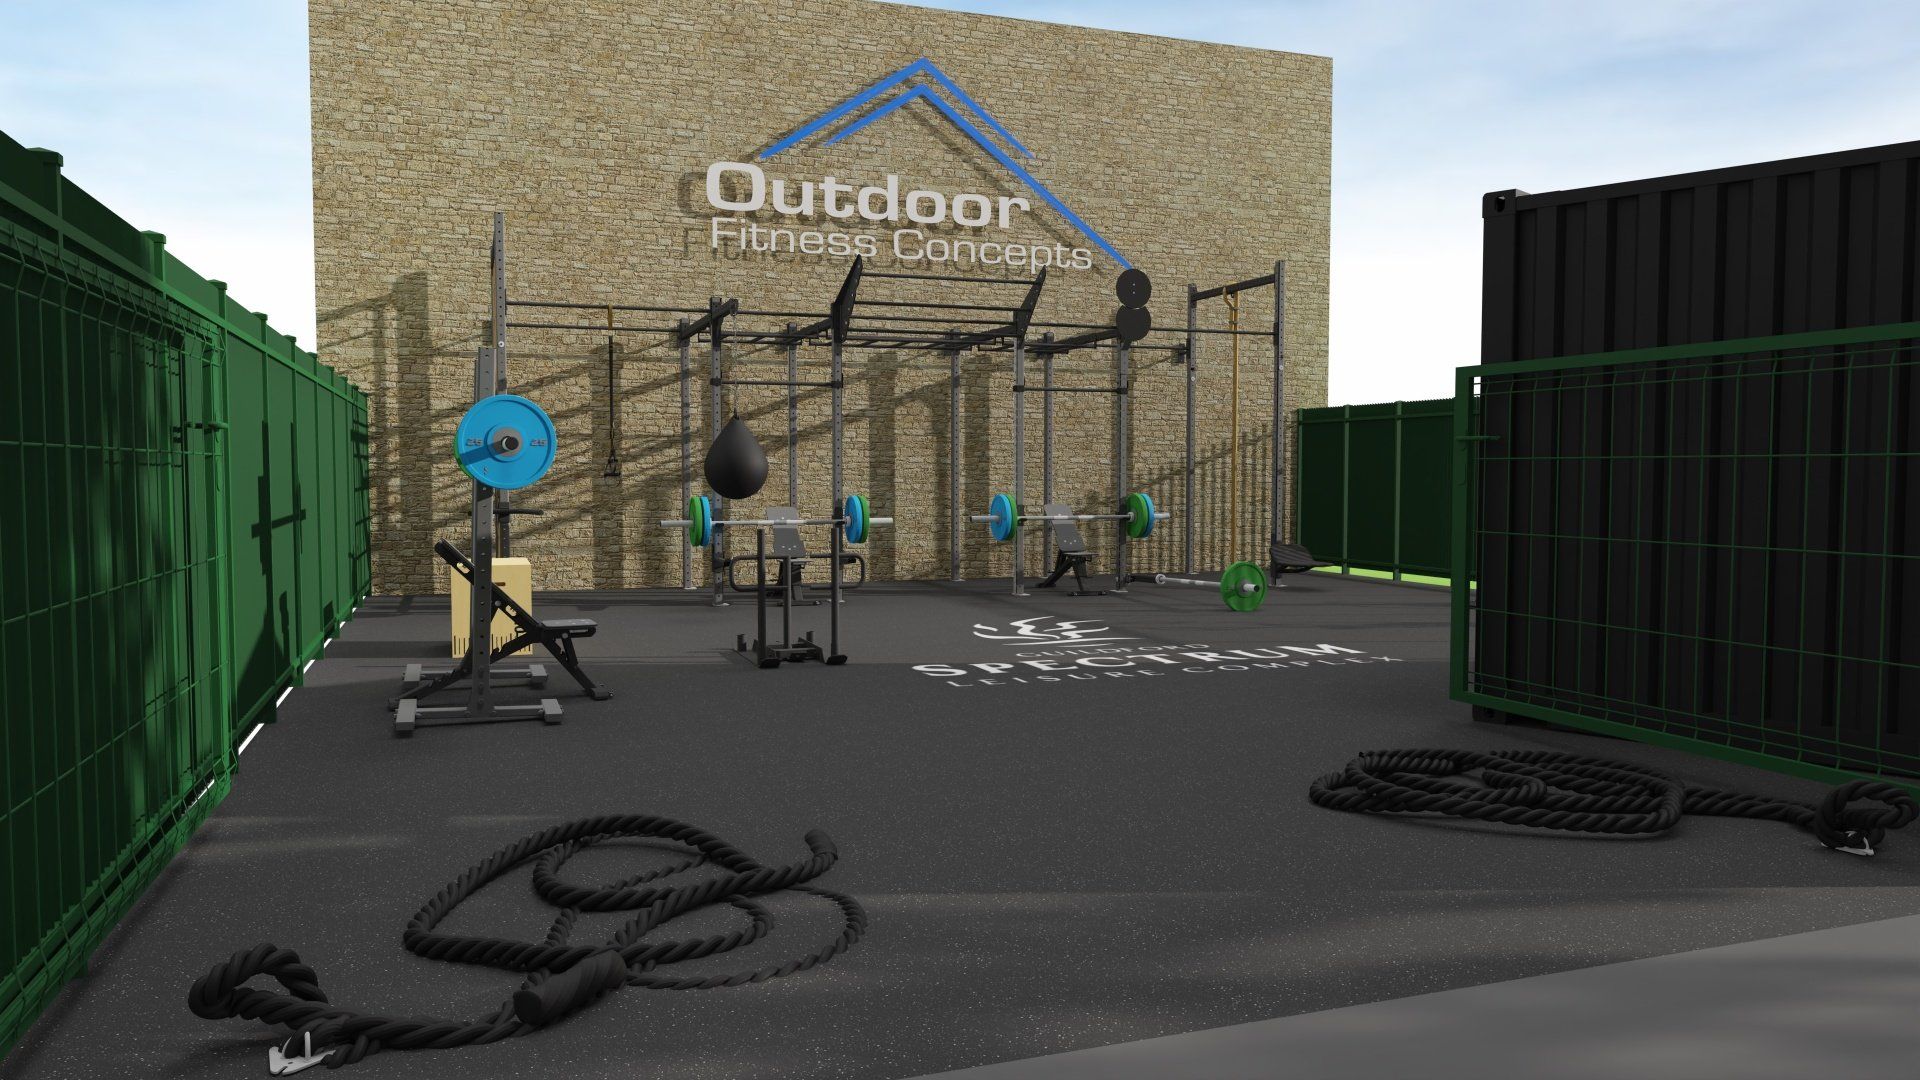 Guildford Spectrum Outdoor Fitness Area - The Vision